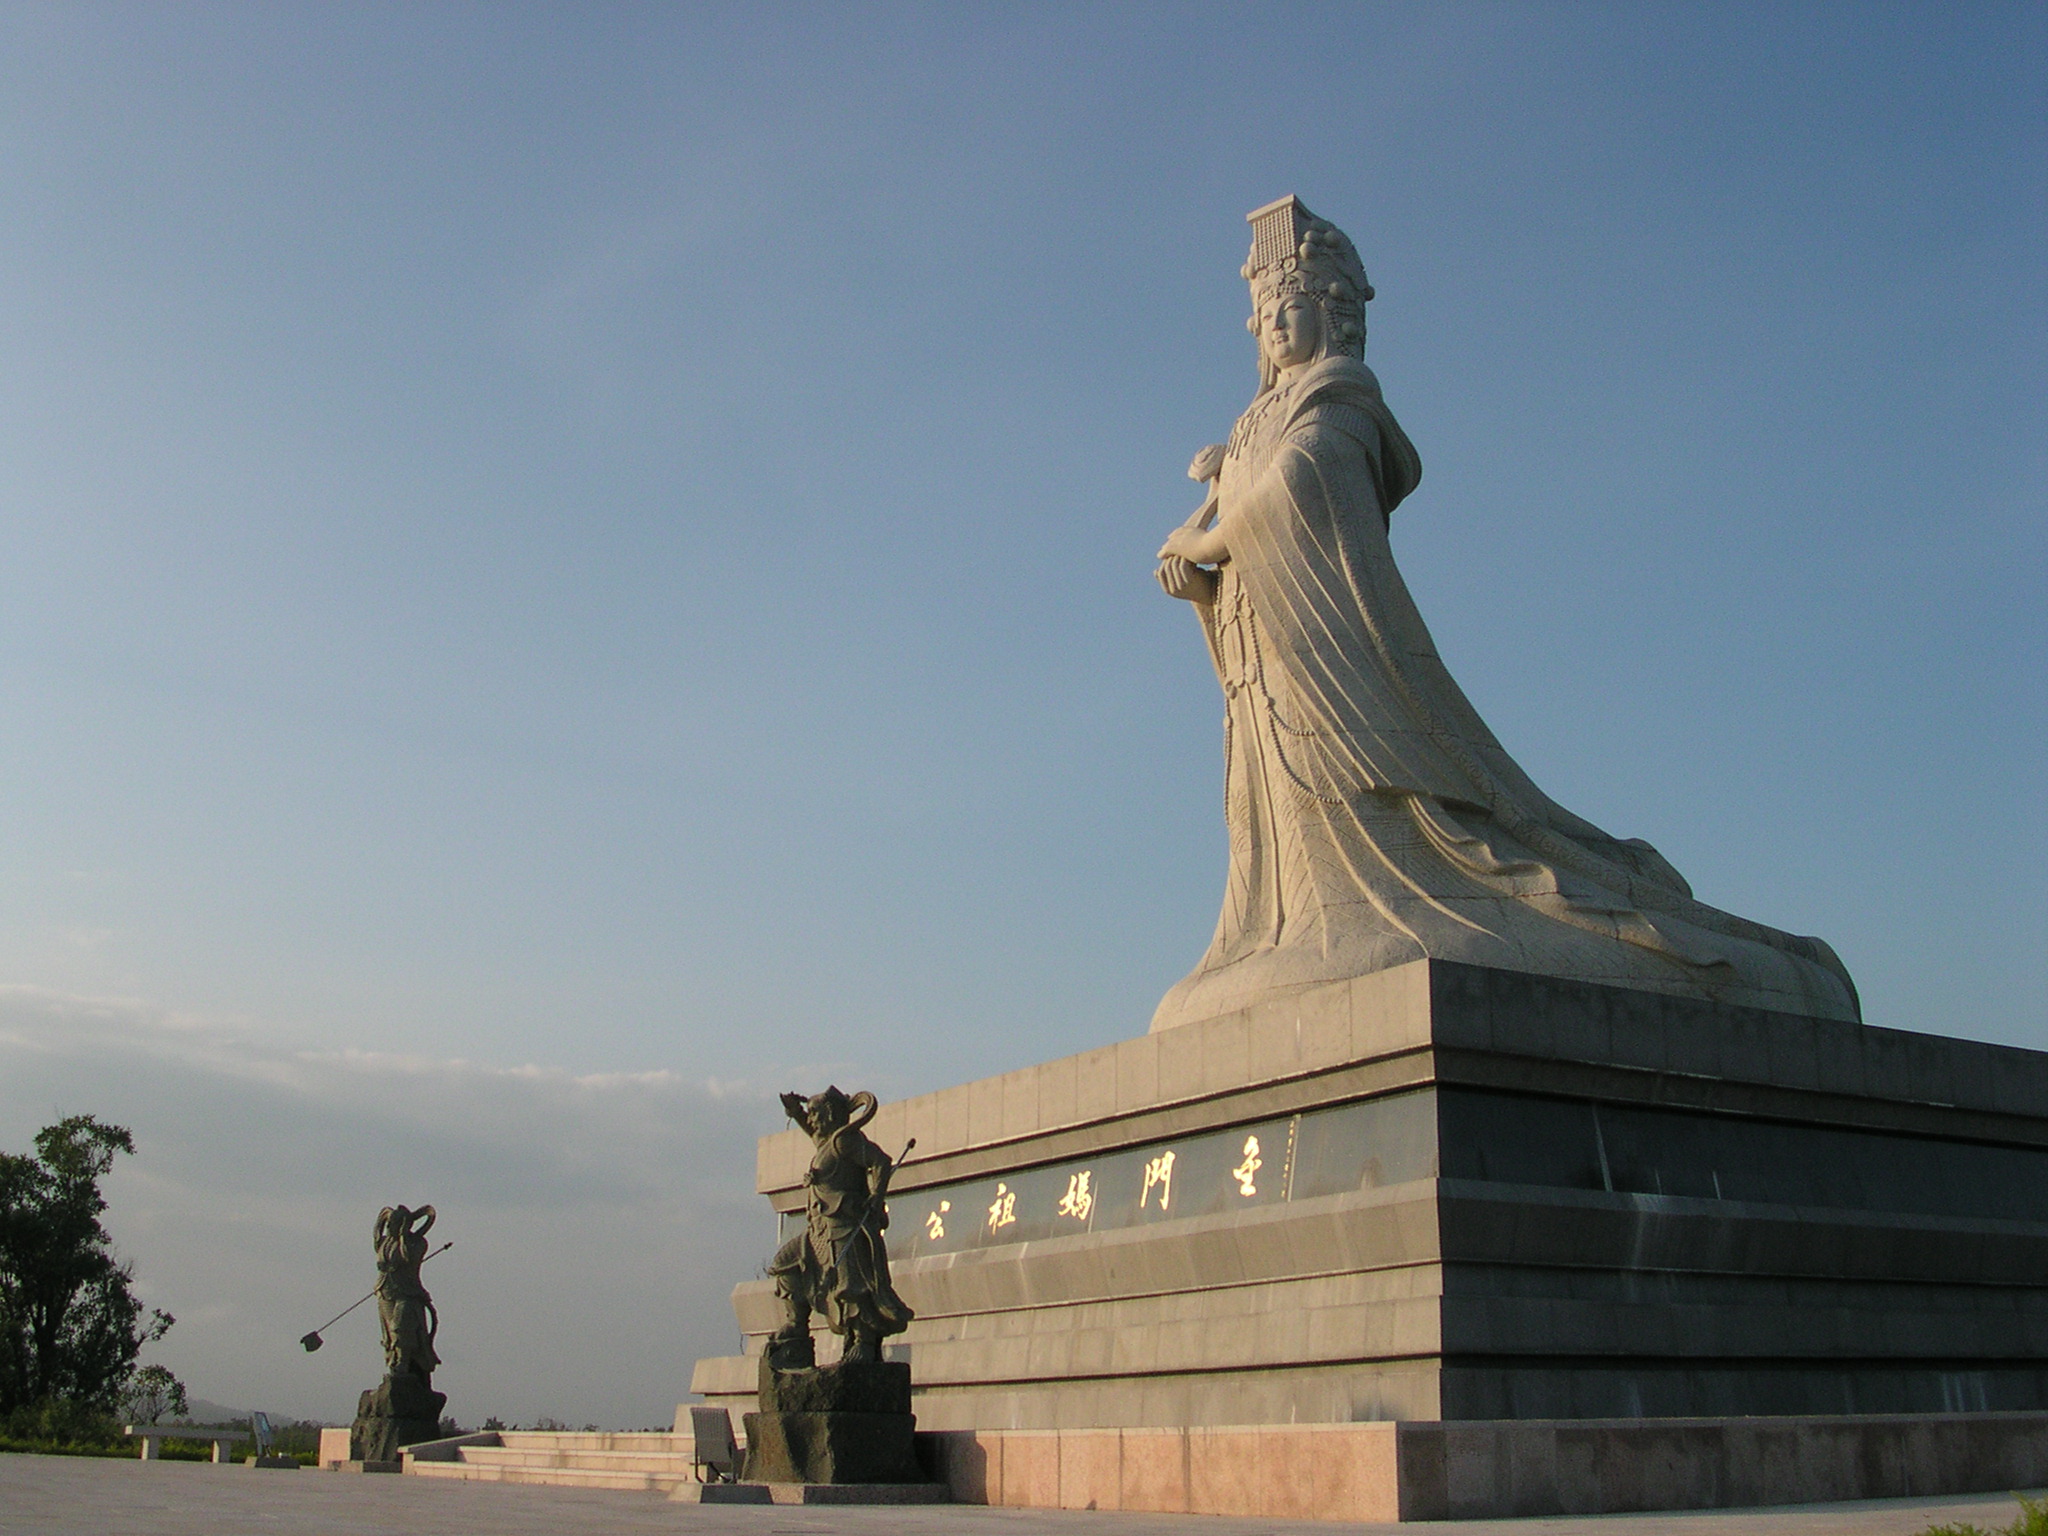 A statue of Mazu, with her two guardian generals.